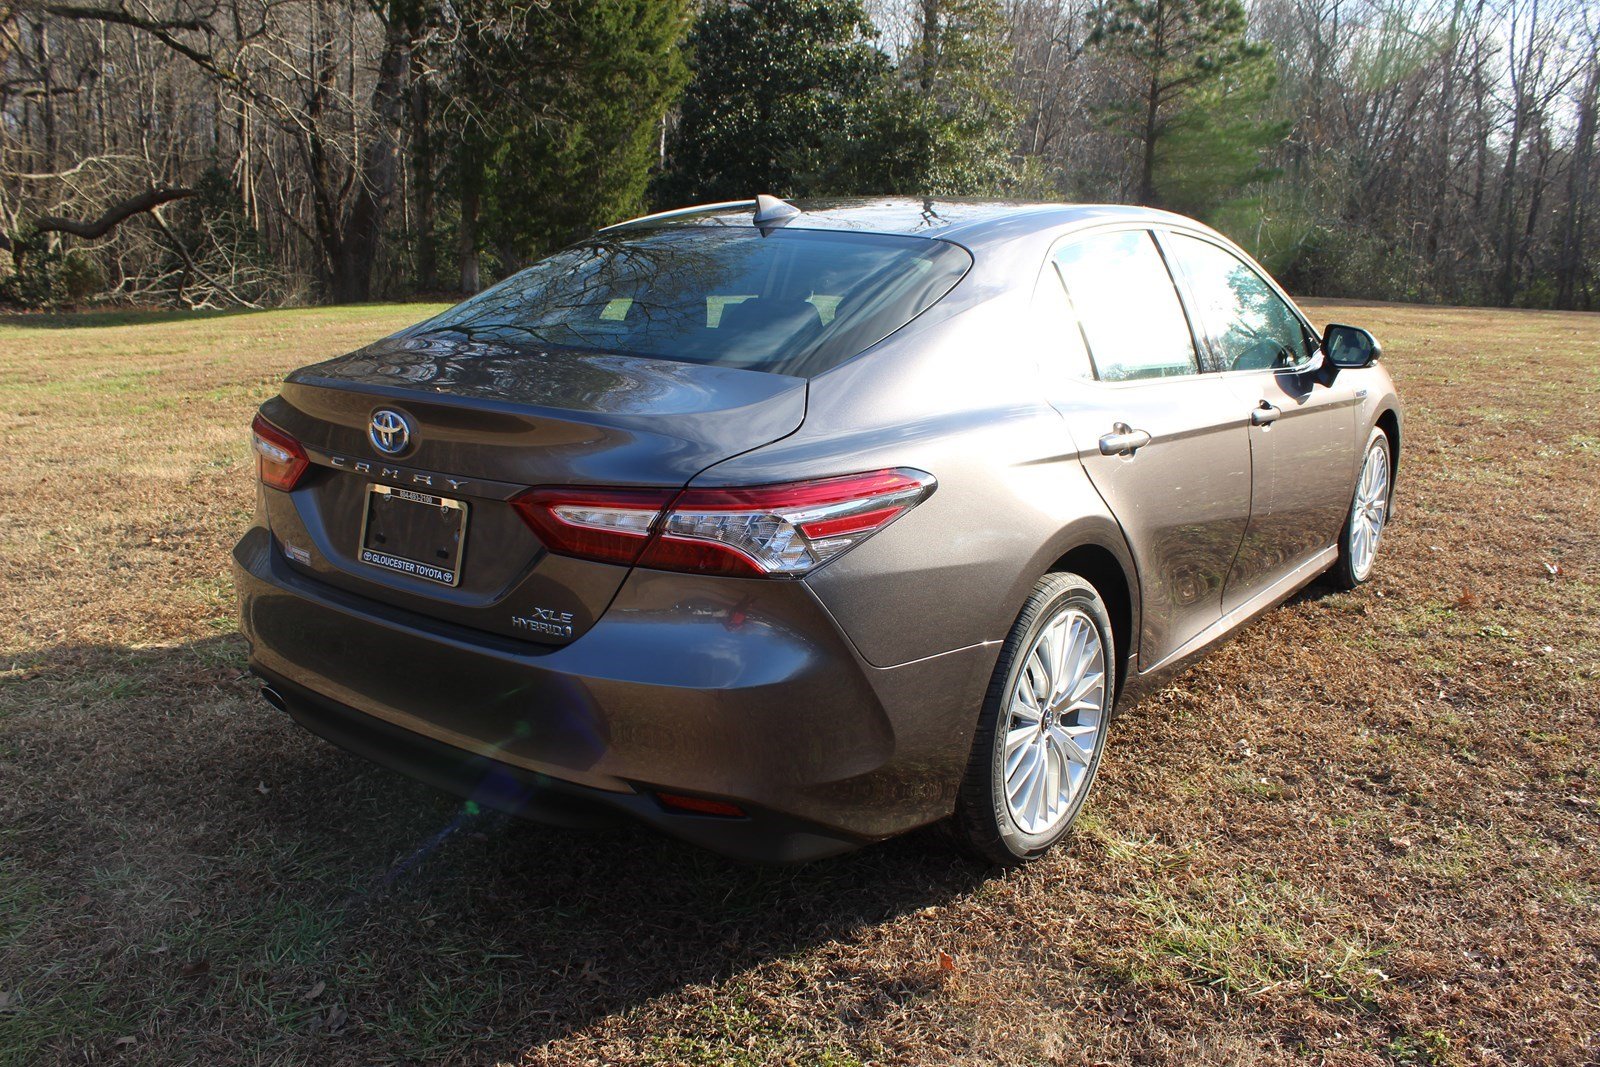 New 2020 Toyota Camry Hybrid XLE 4dr Car in Gloucester #9208 ...
